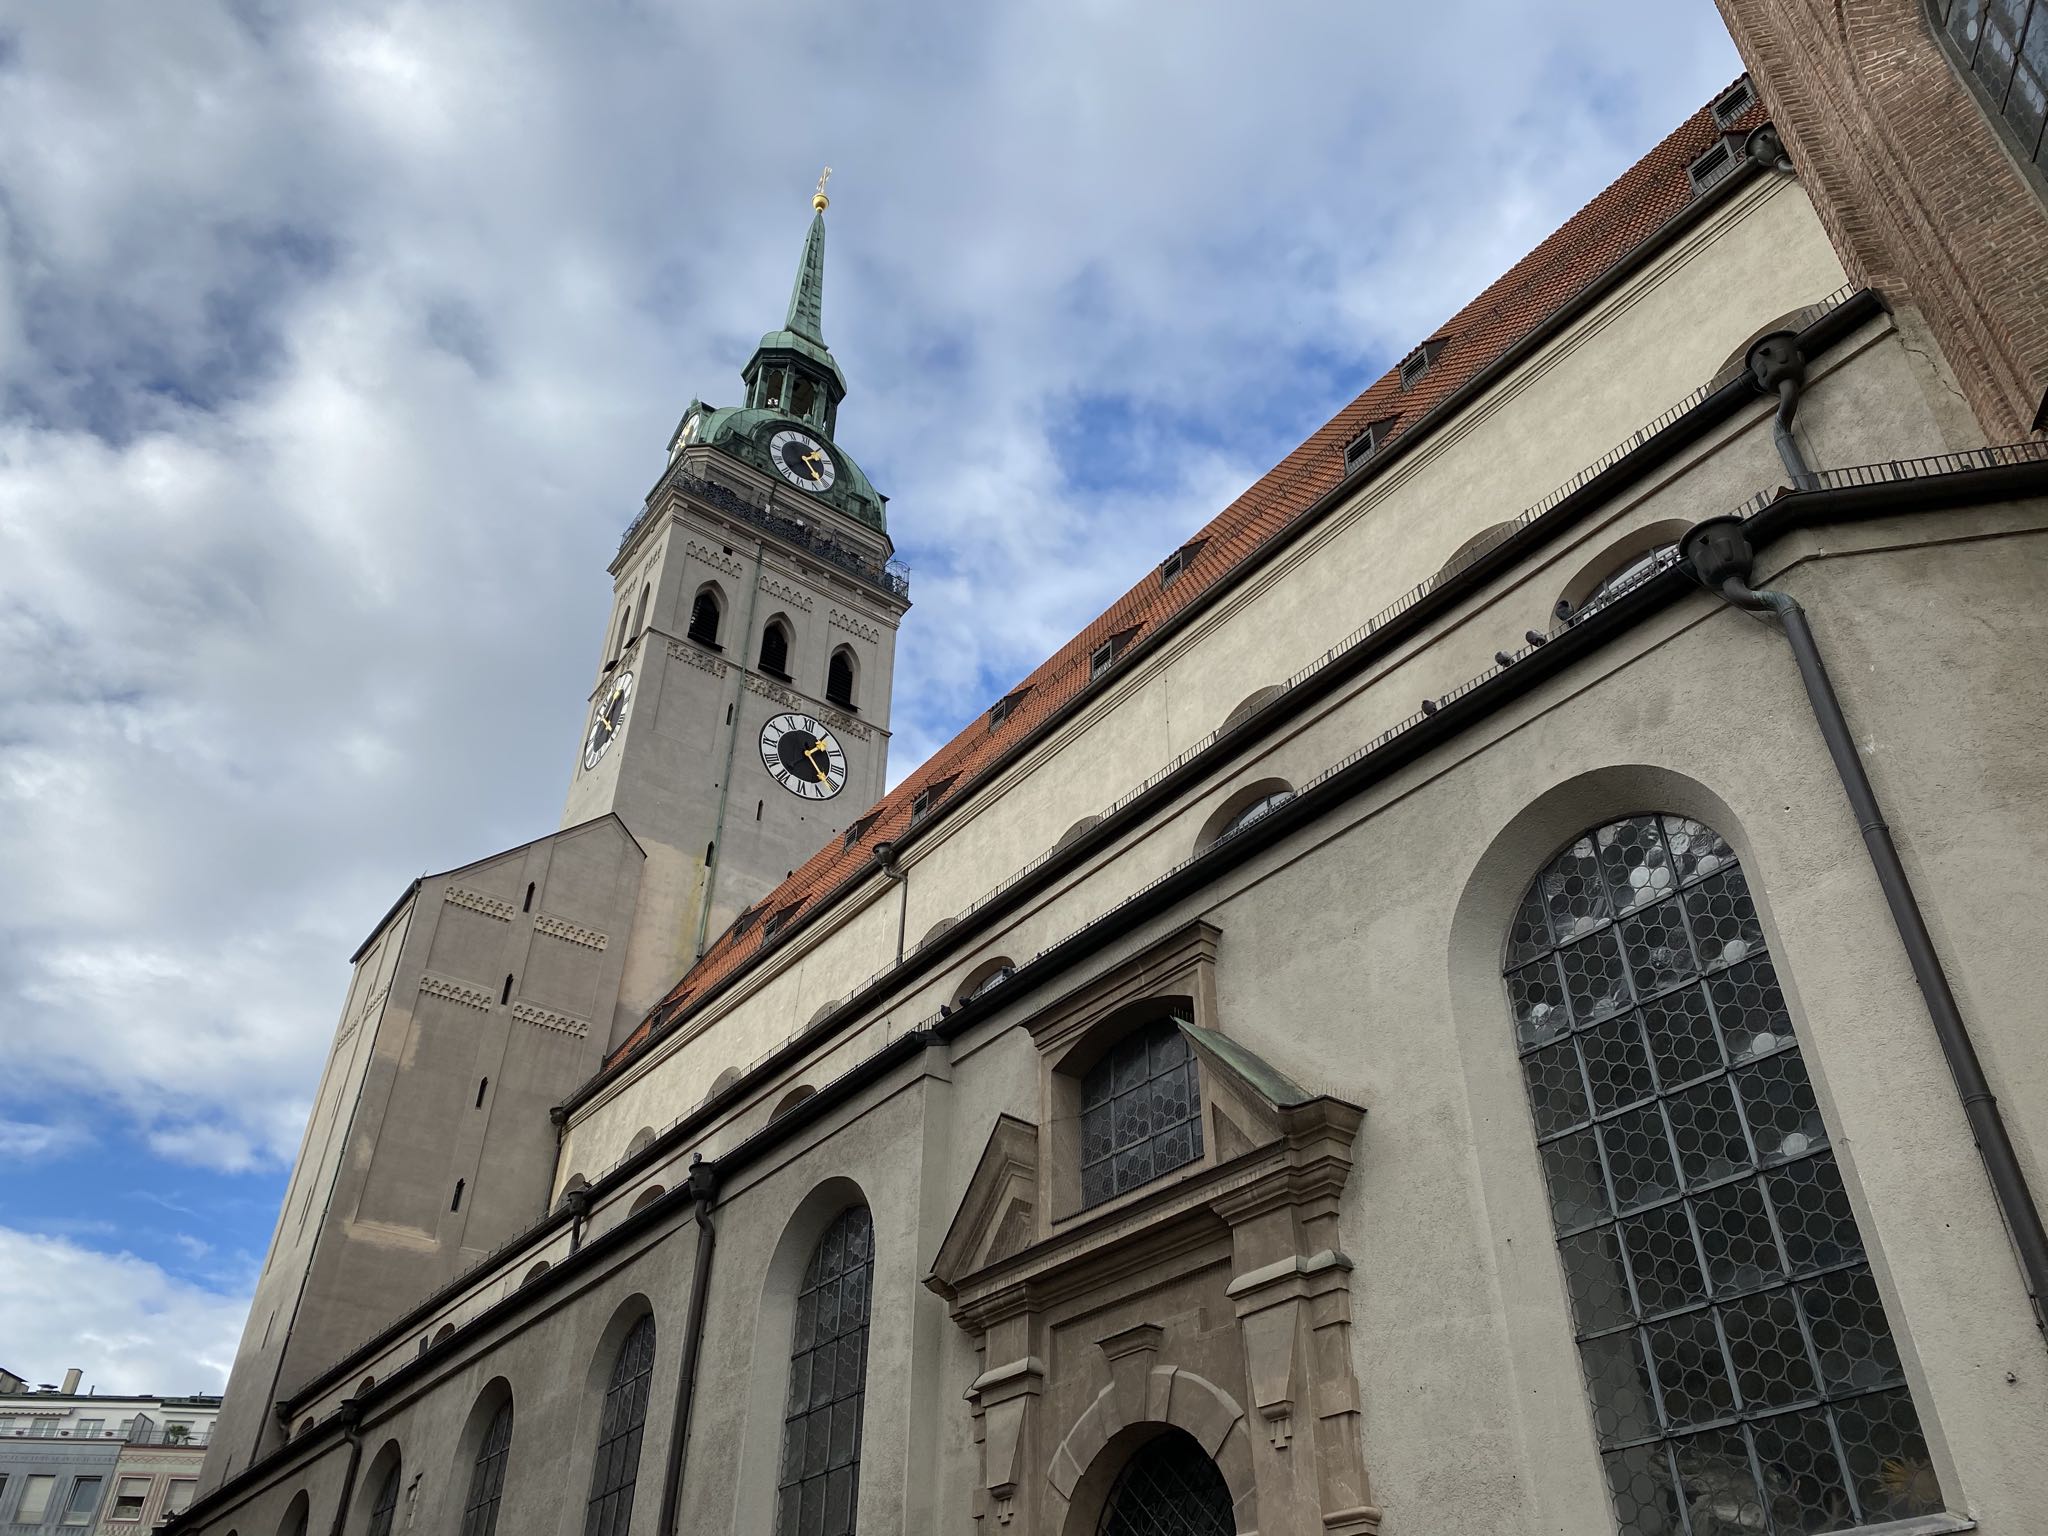 Photo 14 of 49 from the album Munich 2019.